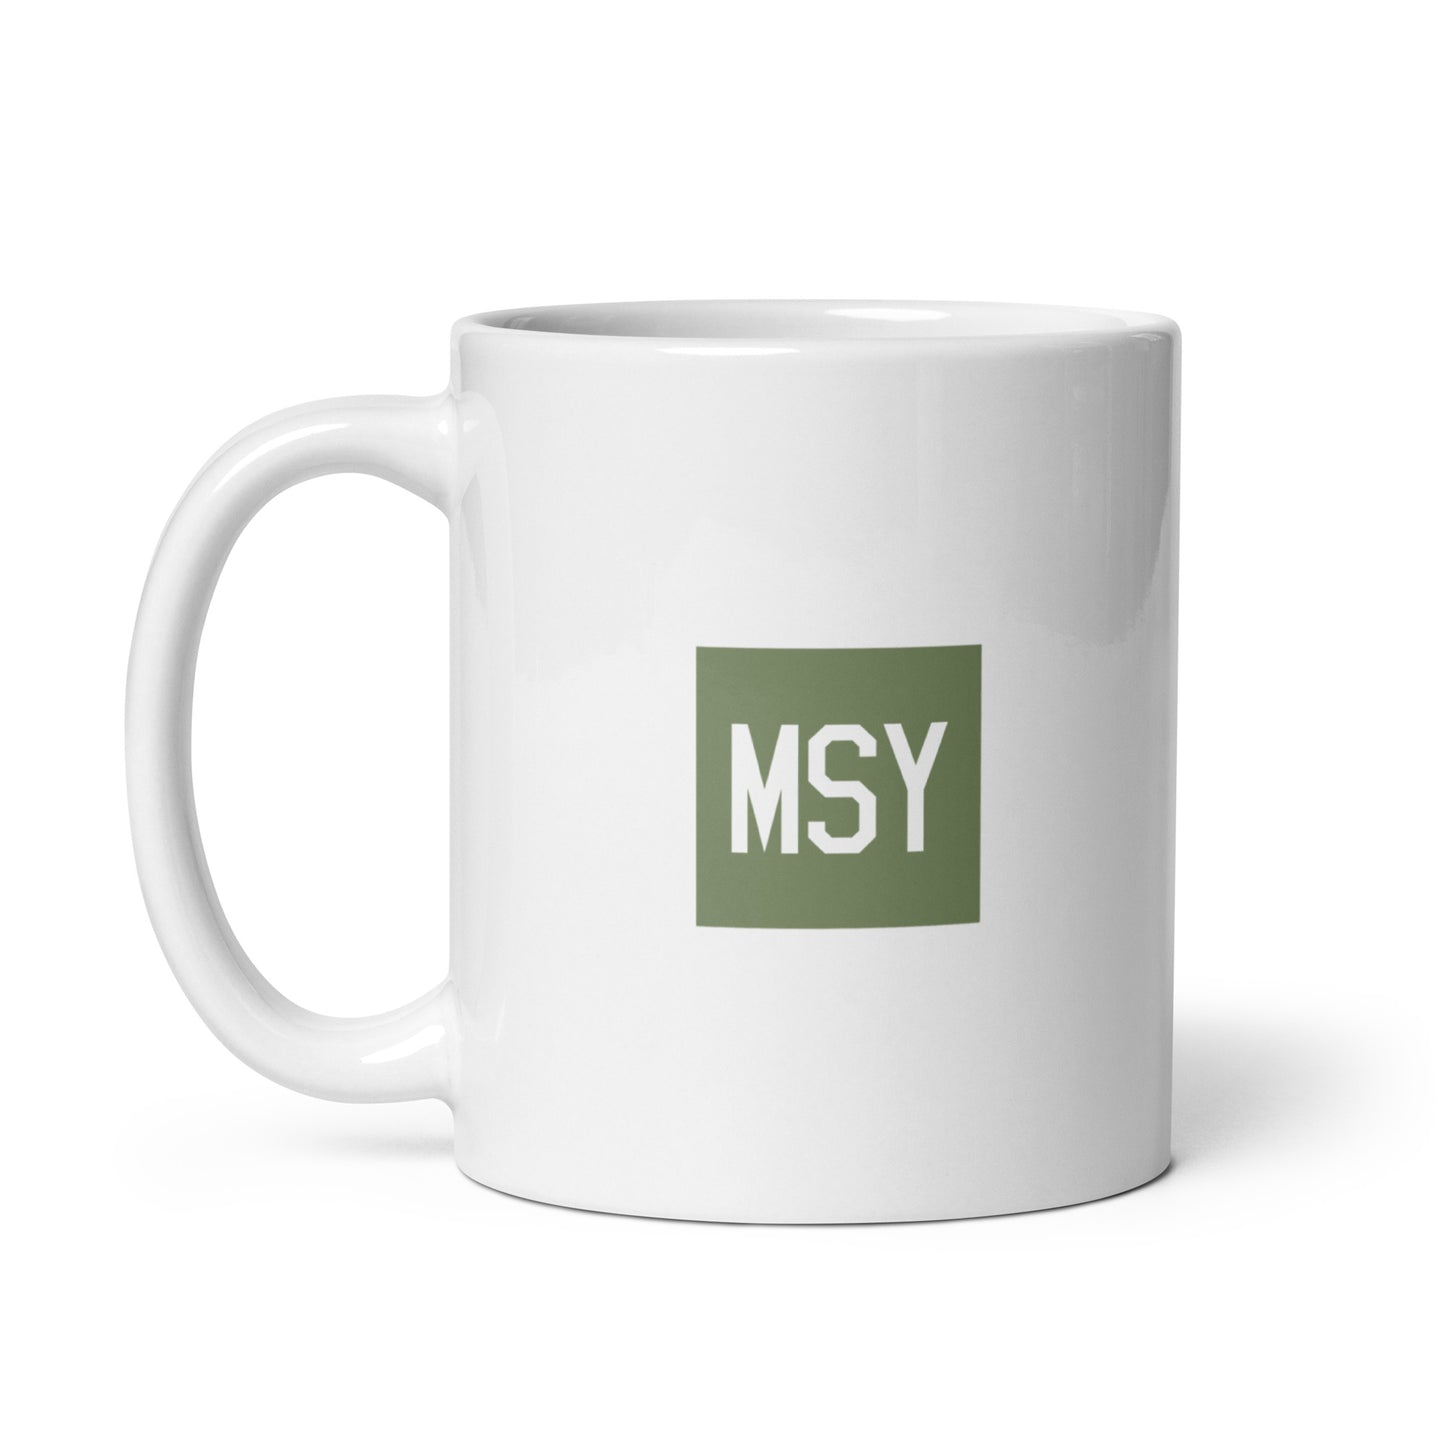 Aviation Gift Coffee Mug - Camouflage Green • MSY New Orleans • YHM Designs - Image 02